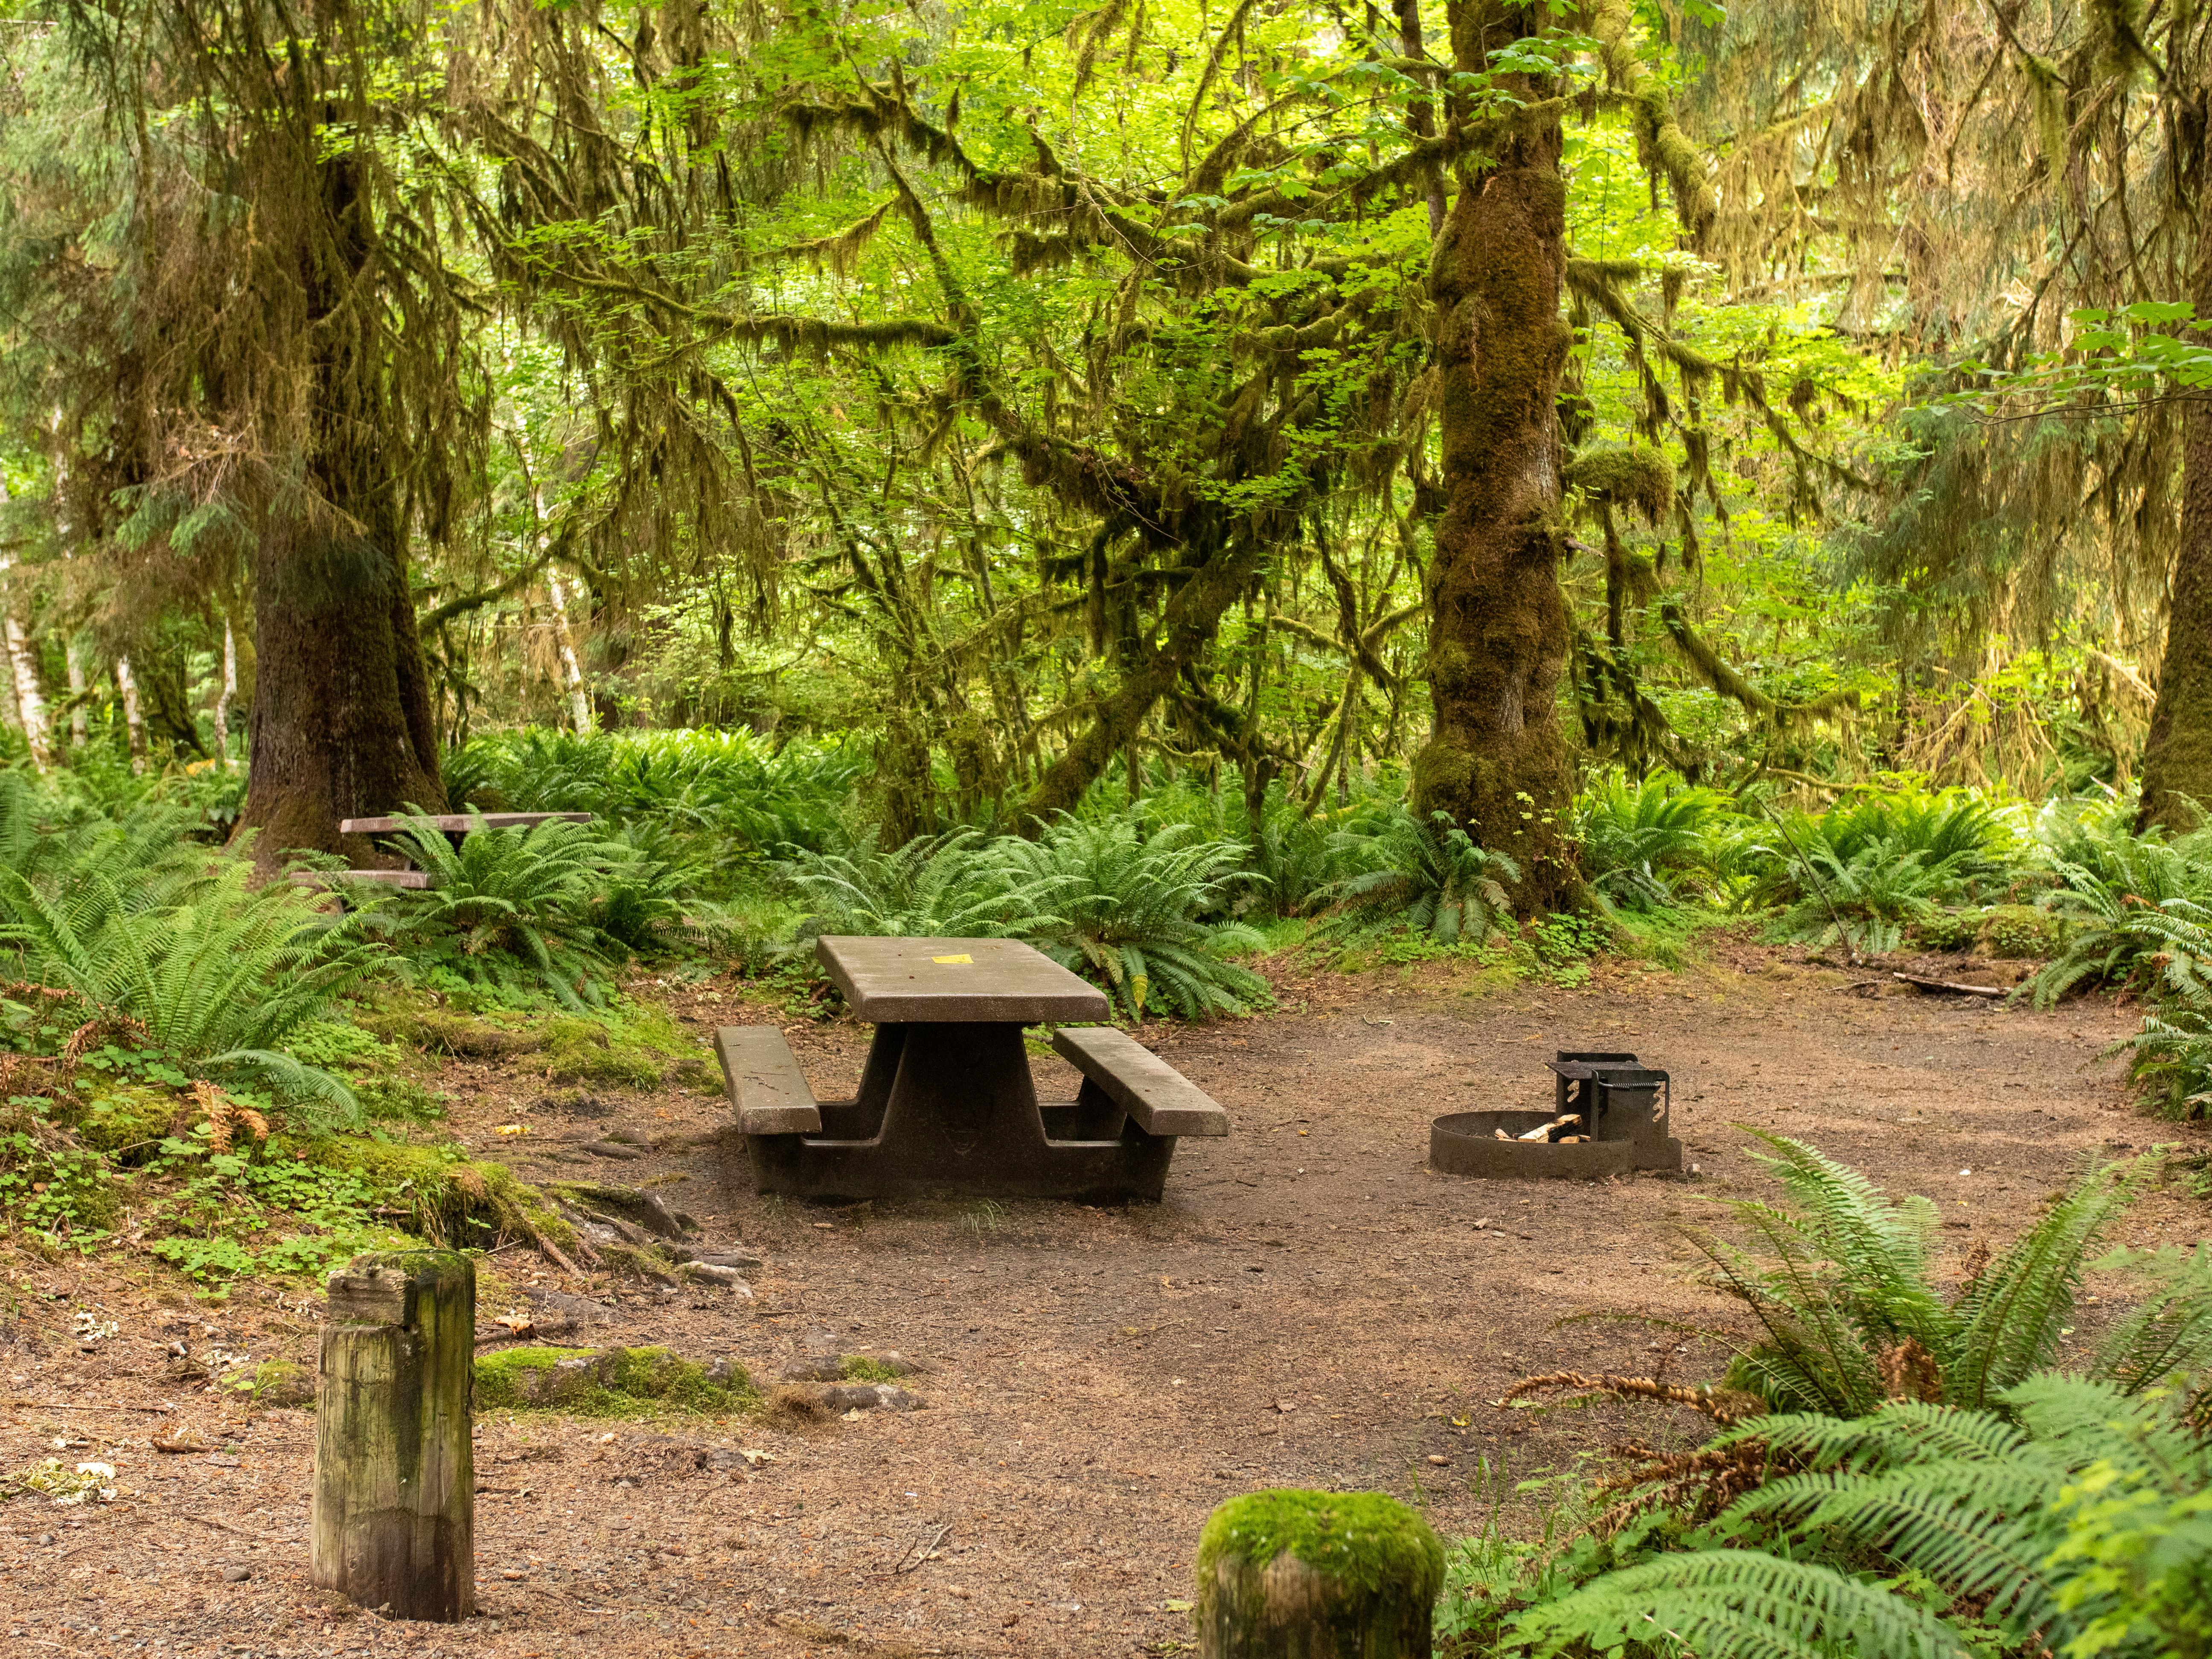 A campsite with picnic table surrounded by mossy trees and ferns.